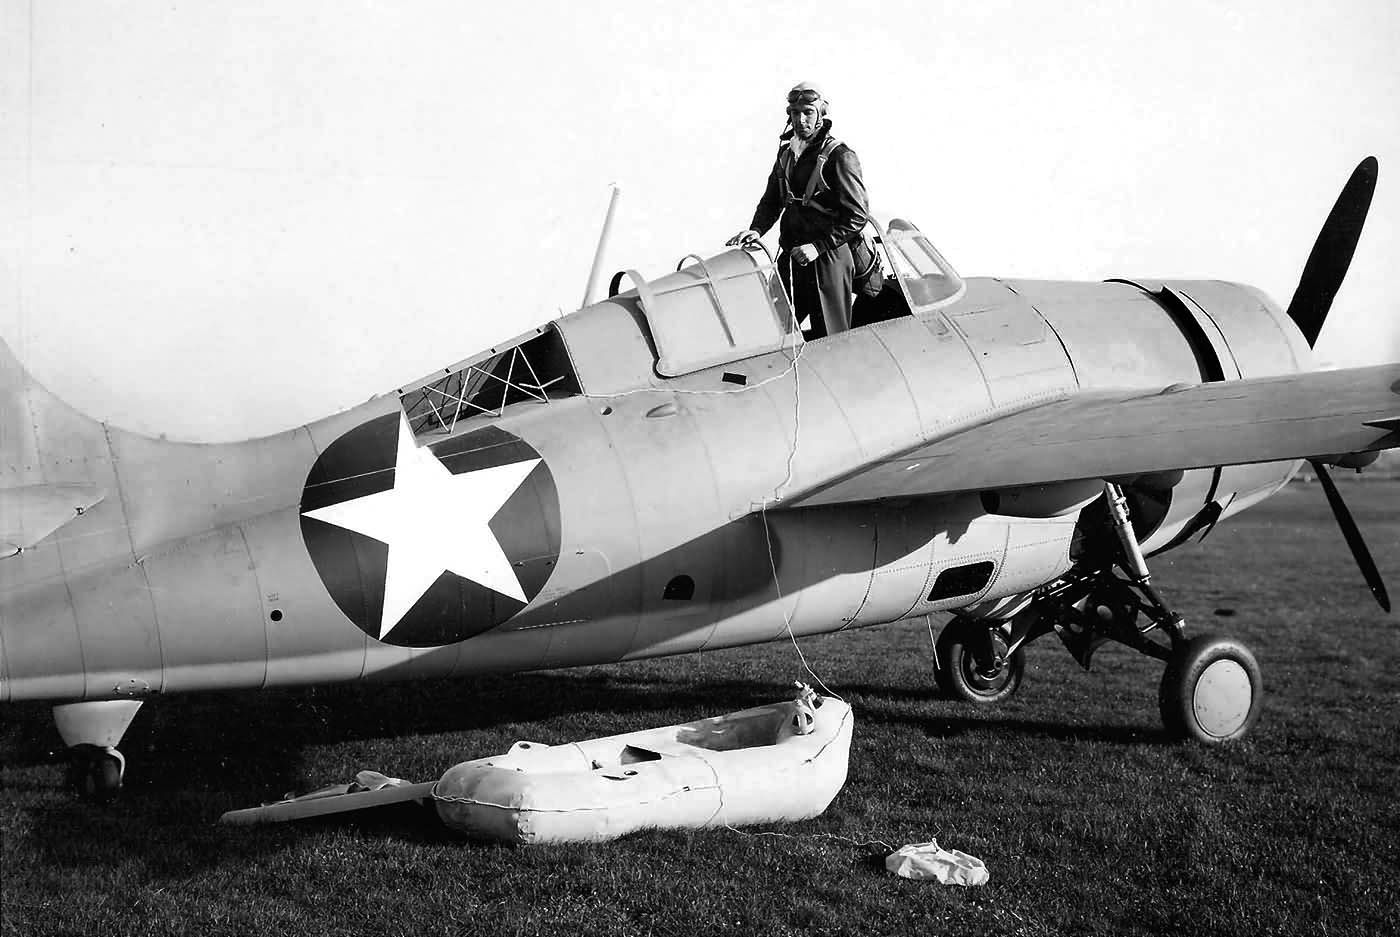 An F4F Wildcat test pilot demonstrates the proper technique for deployment of a life raft after the Grumman fighter has been forced to ditch in the sea. Swett survived ditching his Wildcat after a fierce encounter with the Japanese.